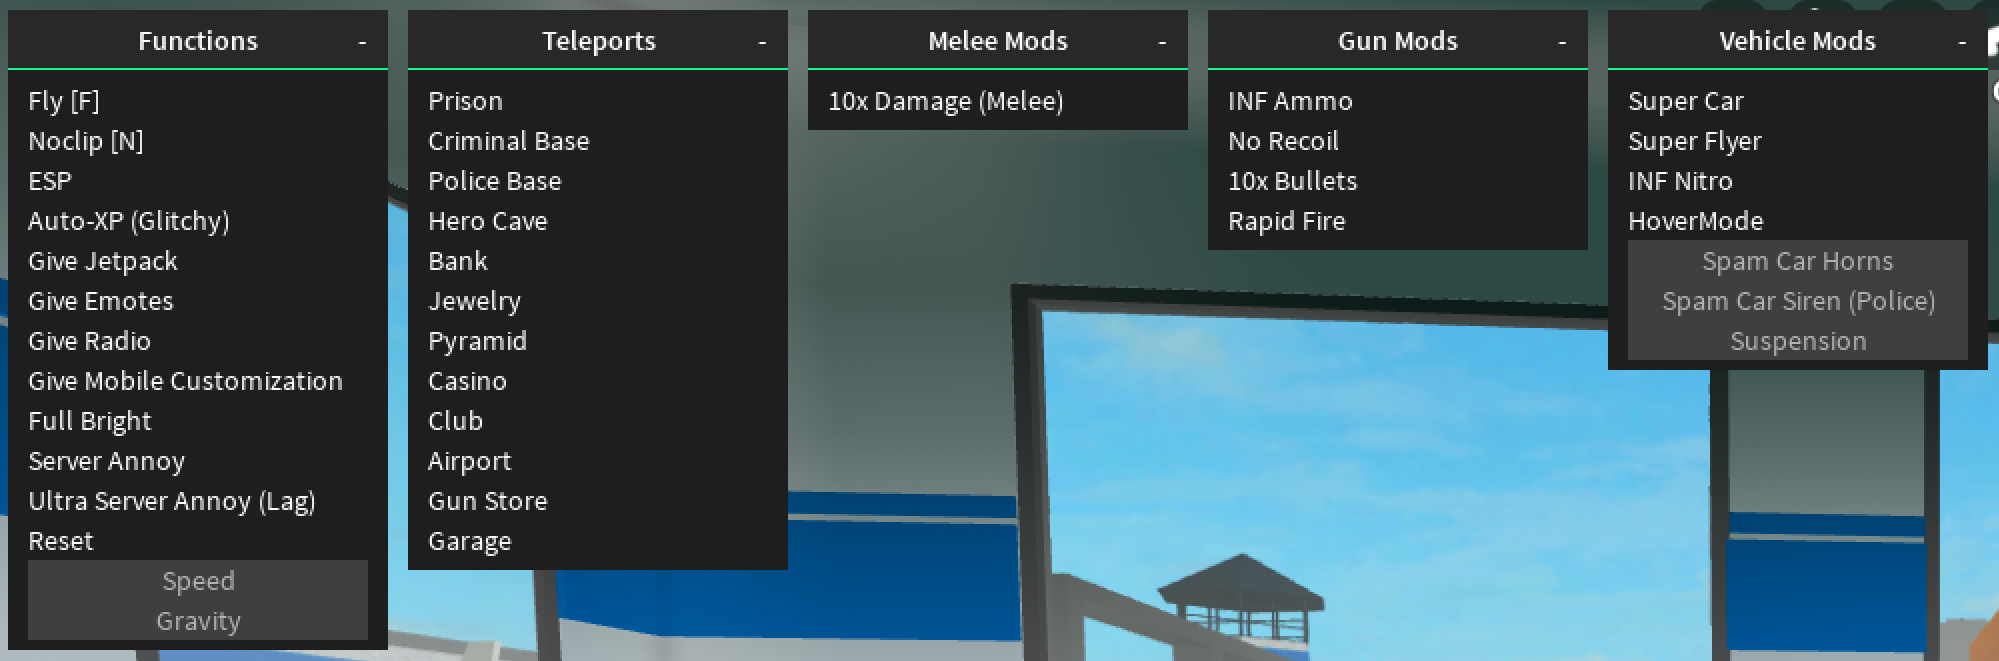 Mad Lads V6 Best Mad City Gui 35 Scripts 5 New Features - roblox mad city gui 2020